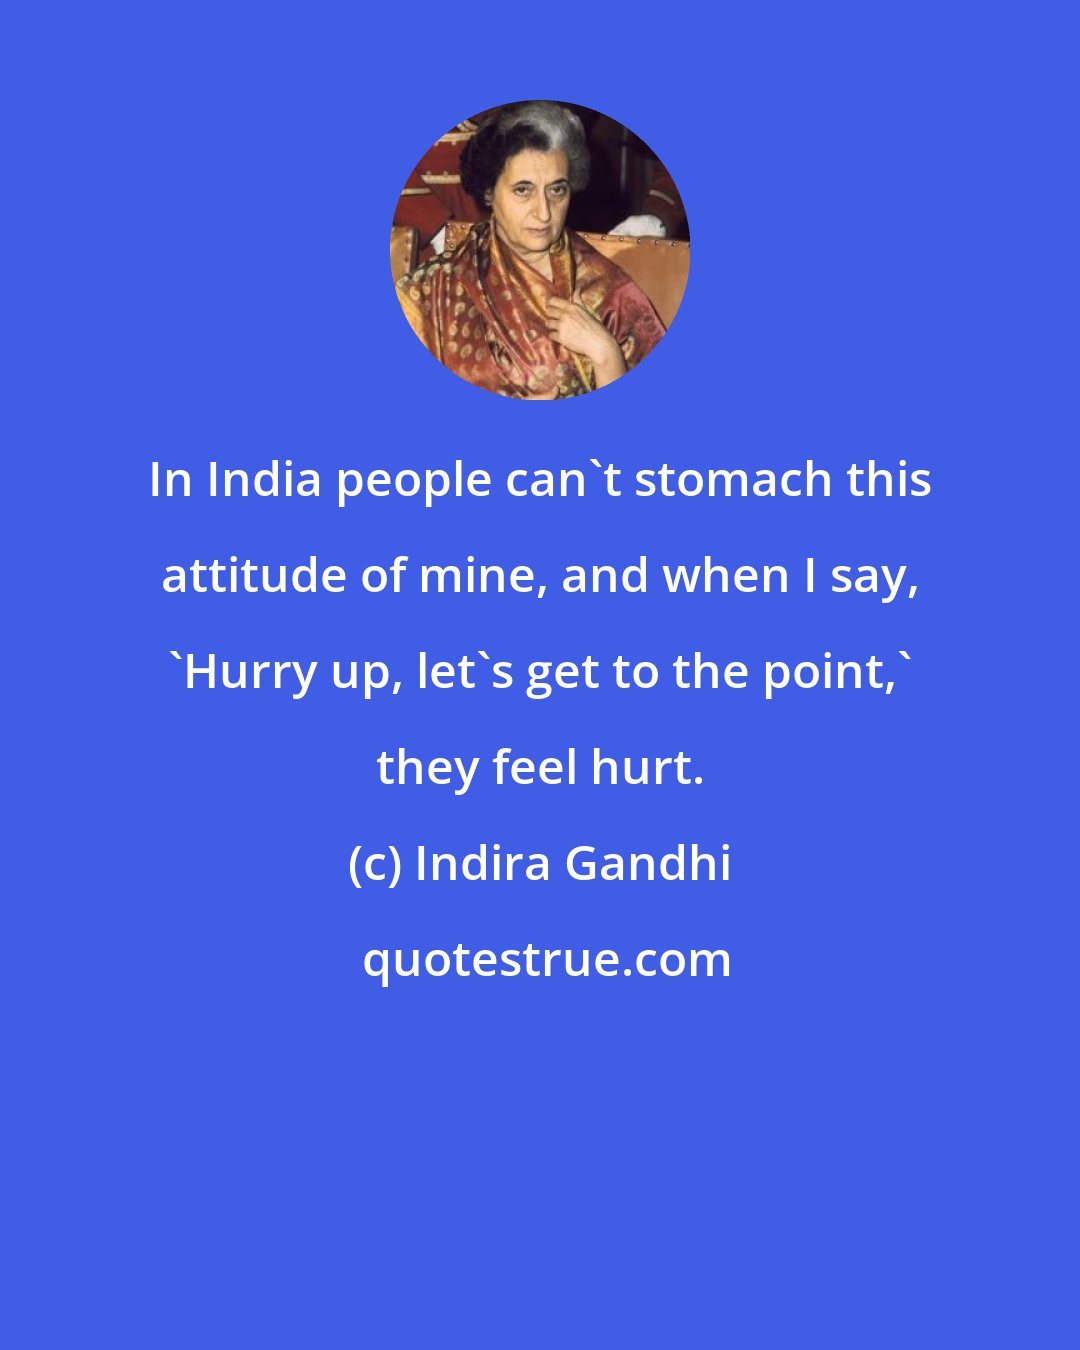 Indira Gandhi: In India people can't stomach this attitude of mine, and when I say, 'Hurry up, let's get to the point,' they feel hurt.